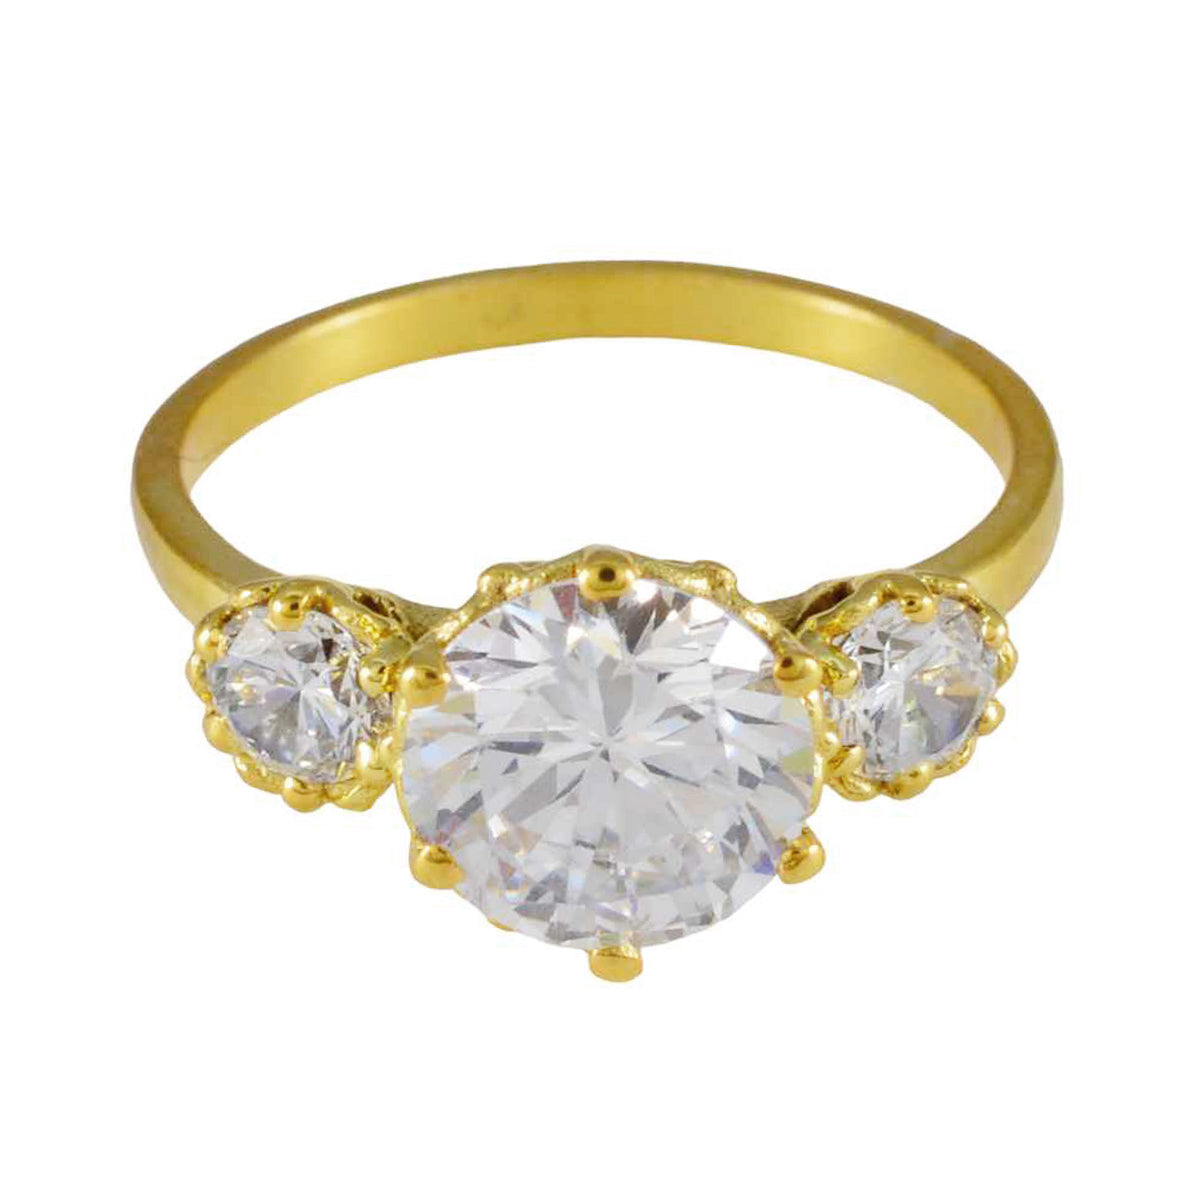 Riyo Indian Silver Ring With Yellow Gold Plating White CZ Stone Round Shape Prong Setting Ring